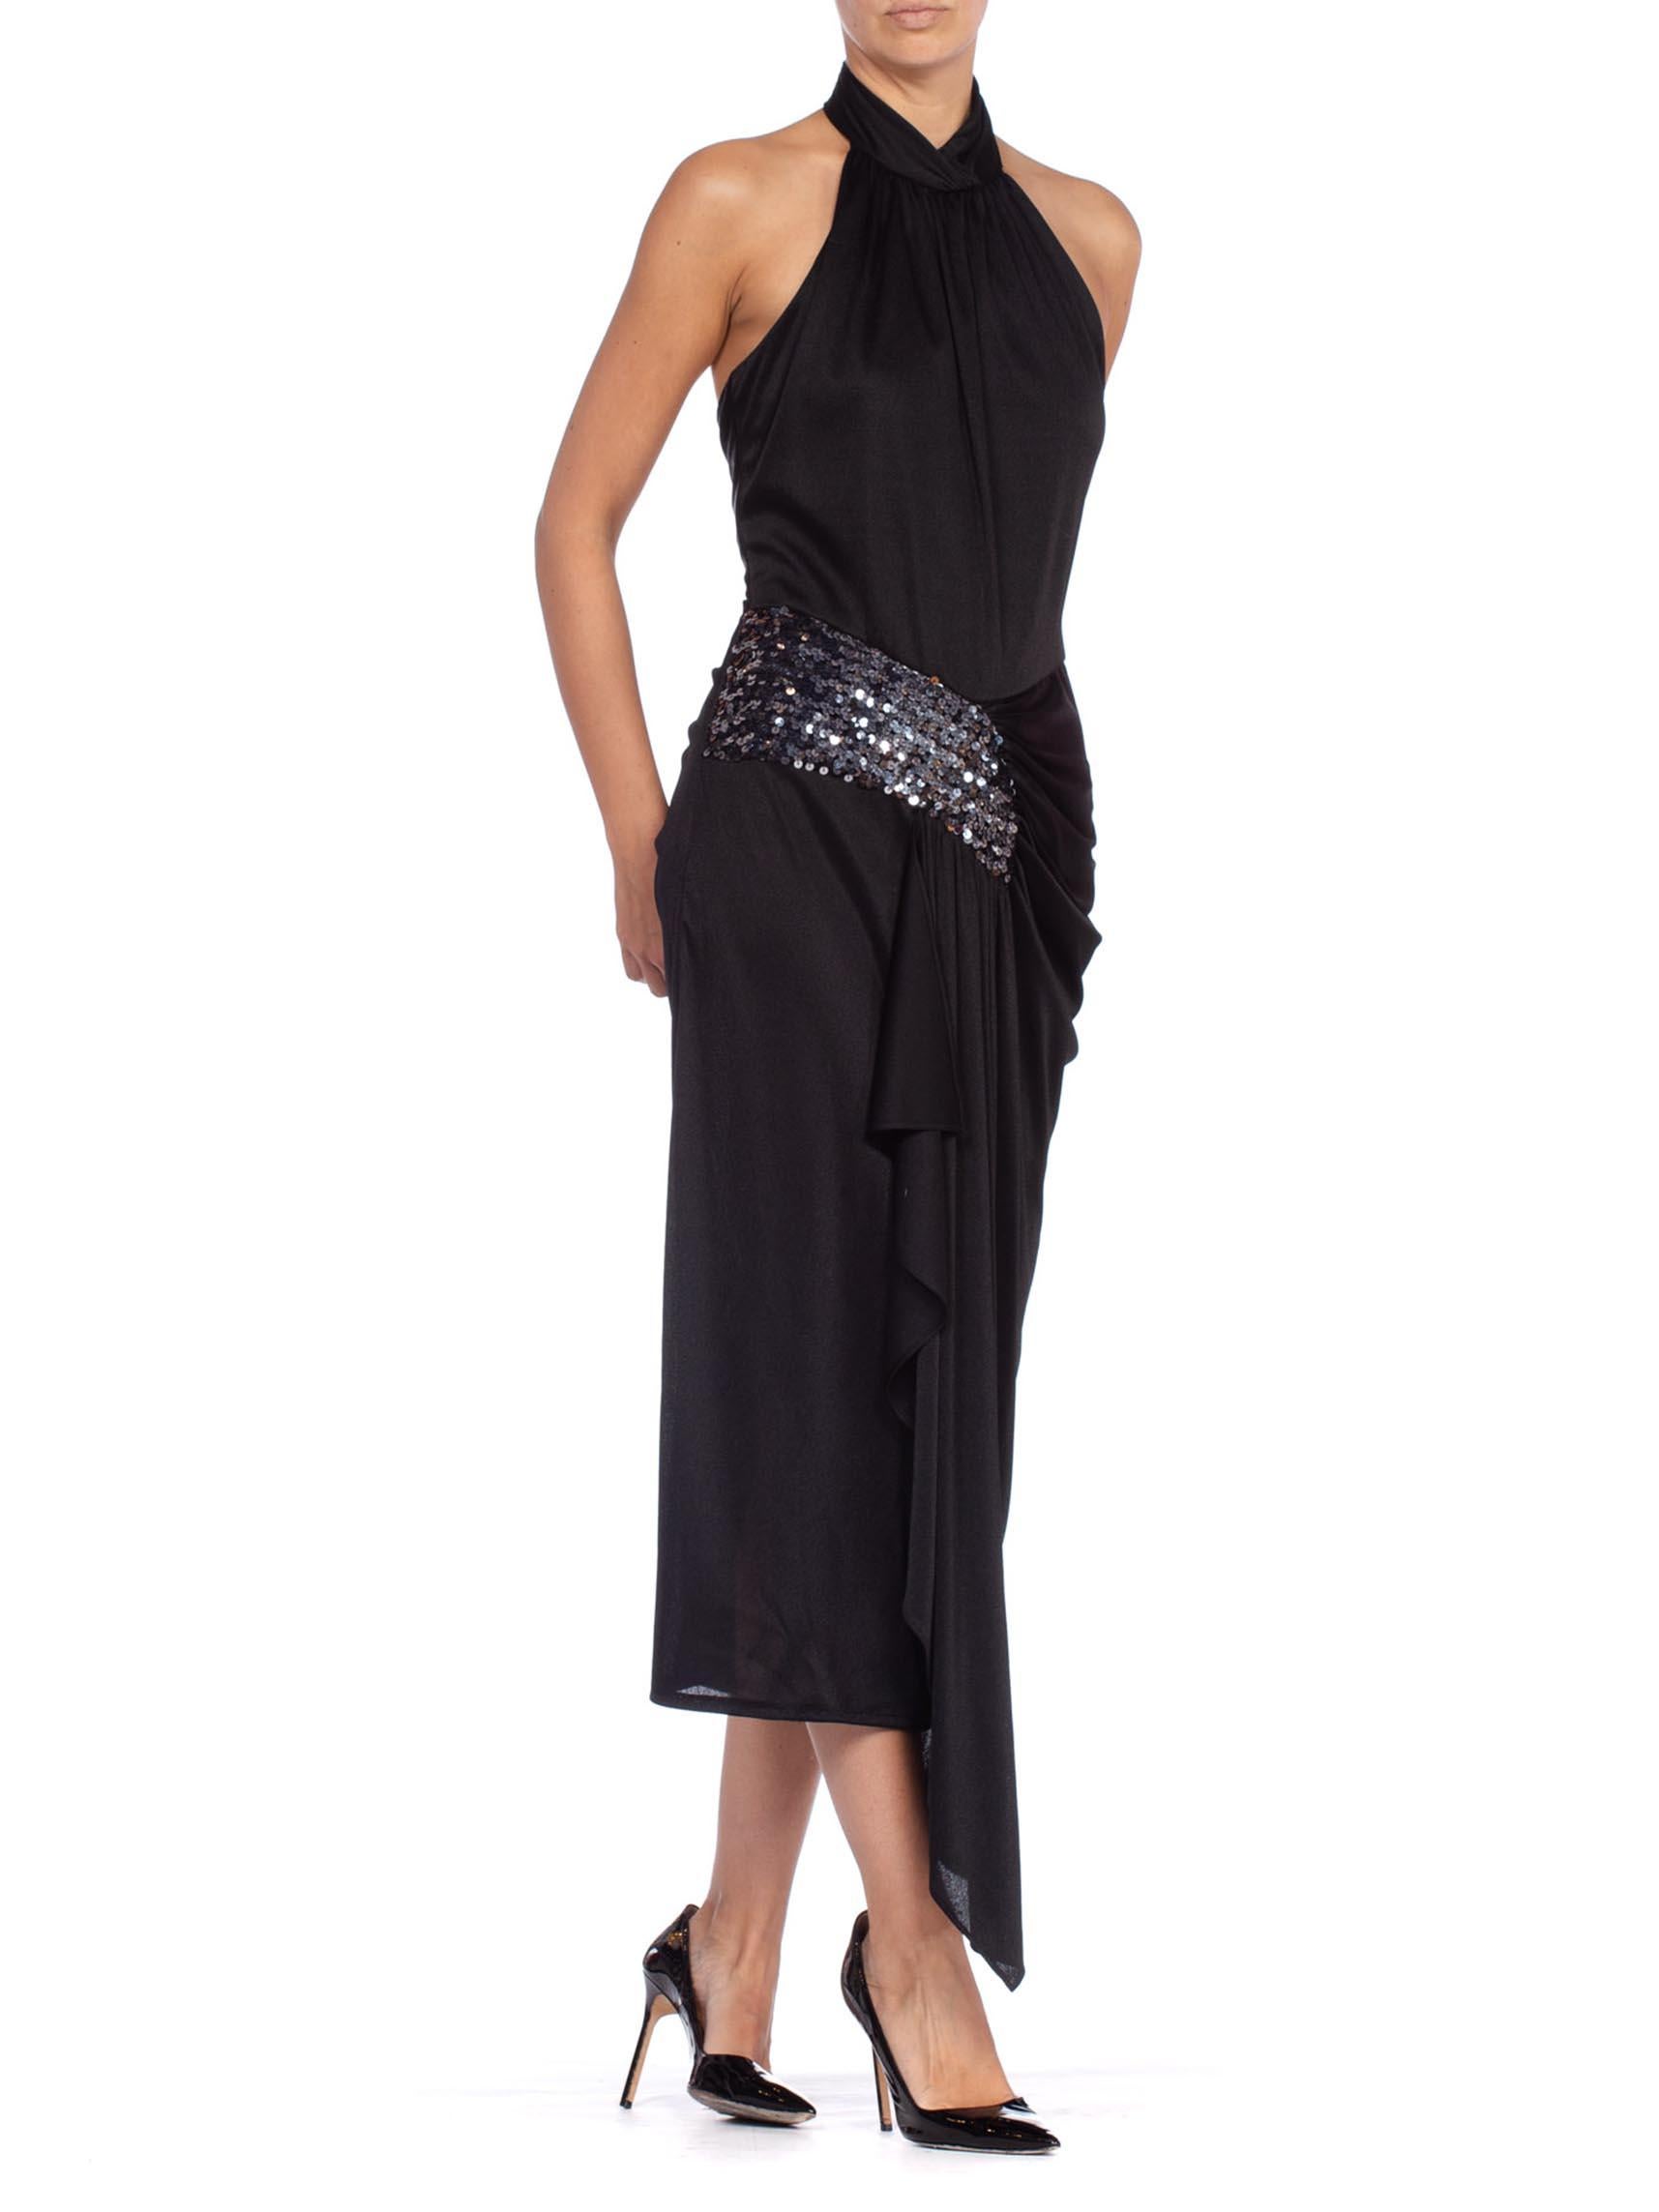 Women's 1980'S Black Polyester Jersey Slinky Disco Party Halter Dress With Silver Sequi For Sale